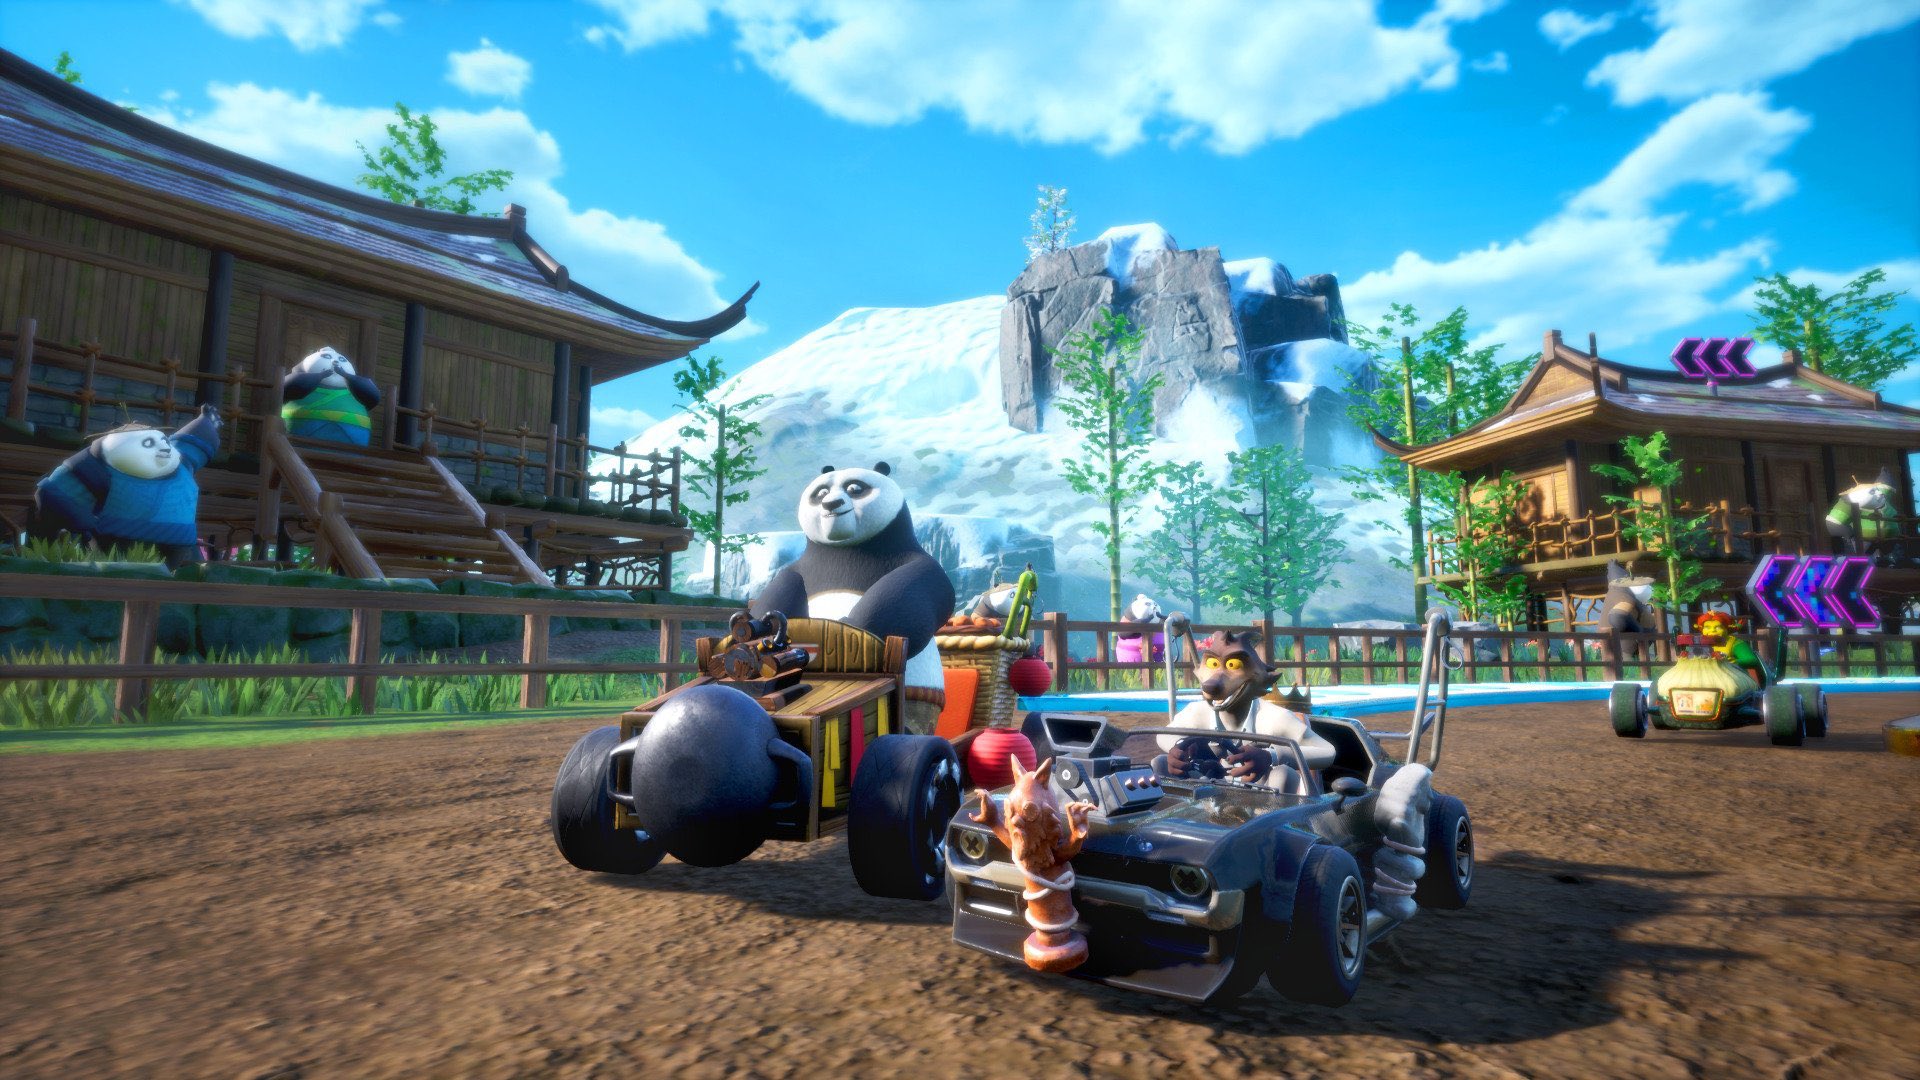 Kung Fu Panda characters race side-by-side in go-karts down a dirt path